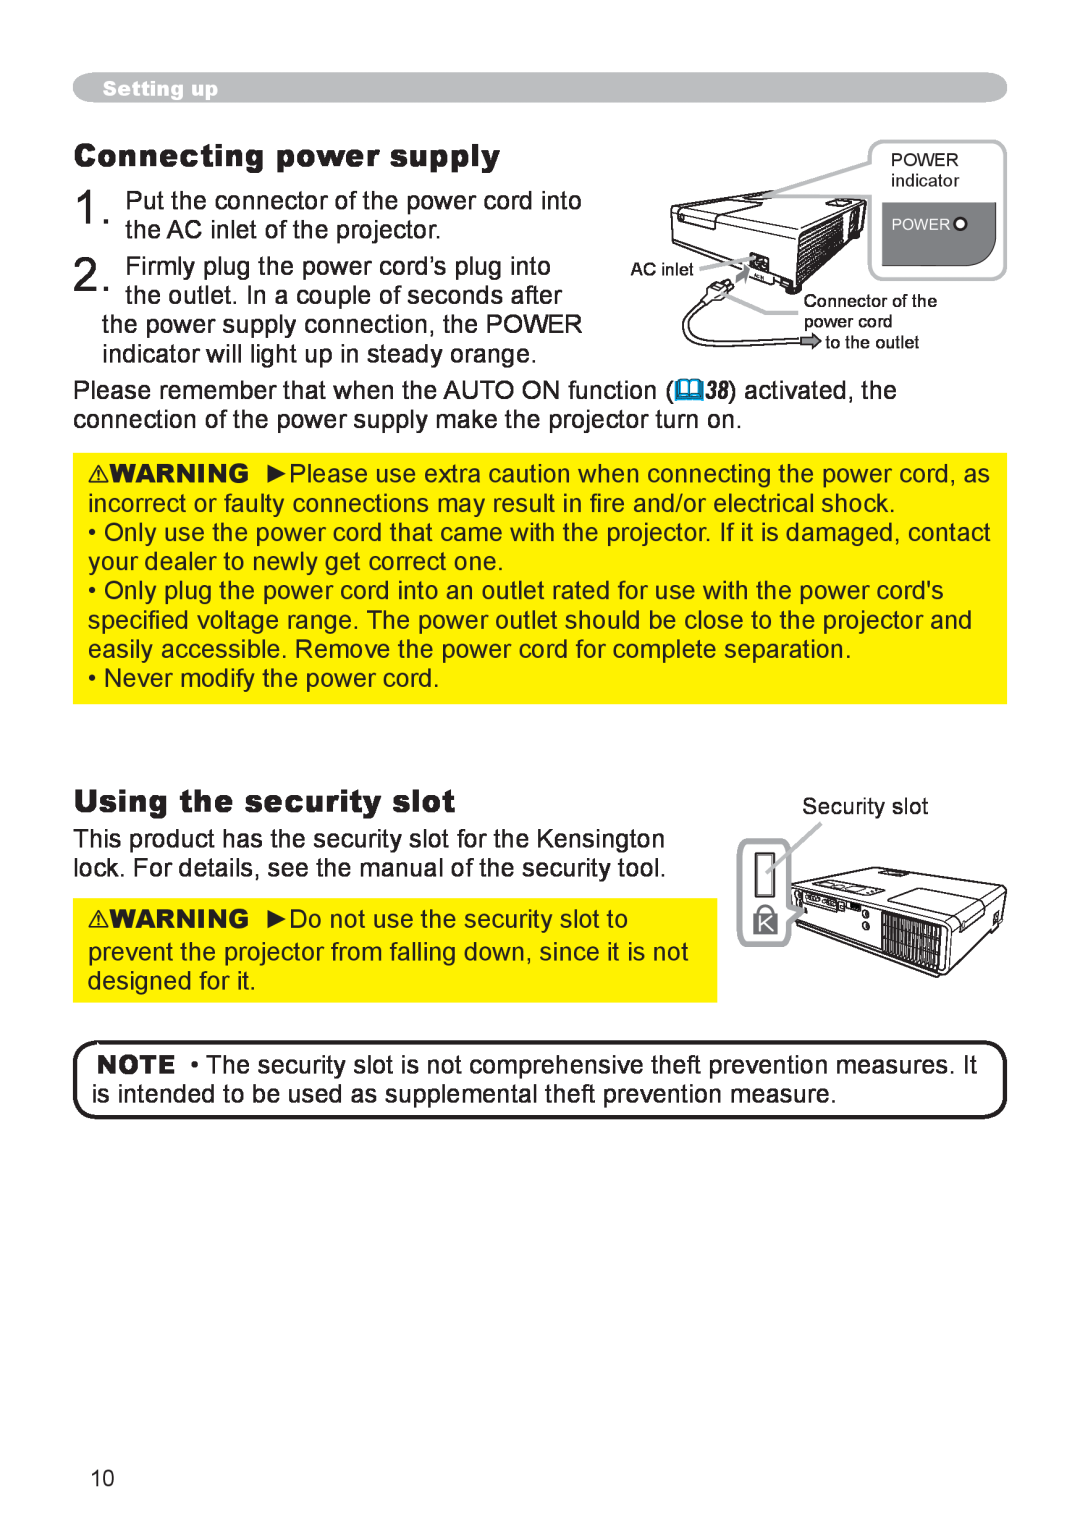 Dukane 8783 user manual Connecting power supply, Using the security slot 